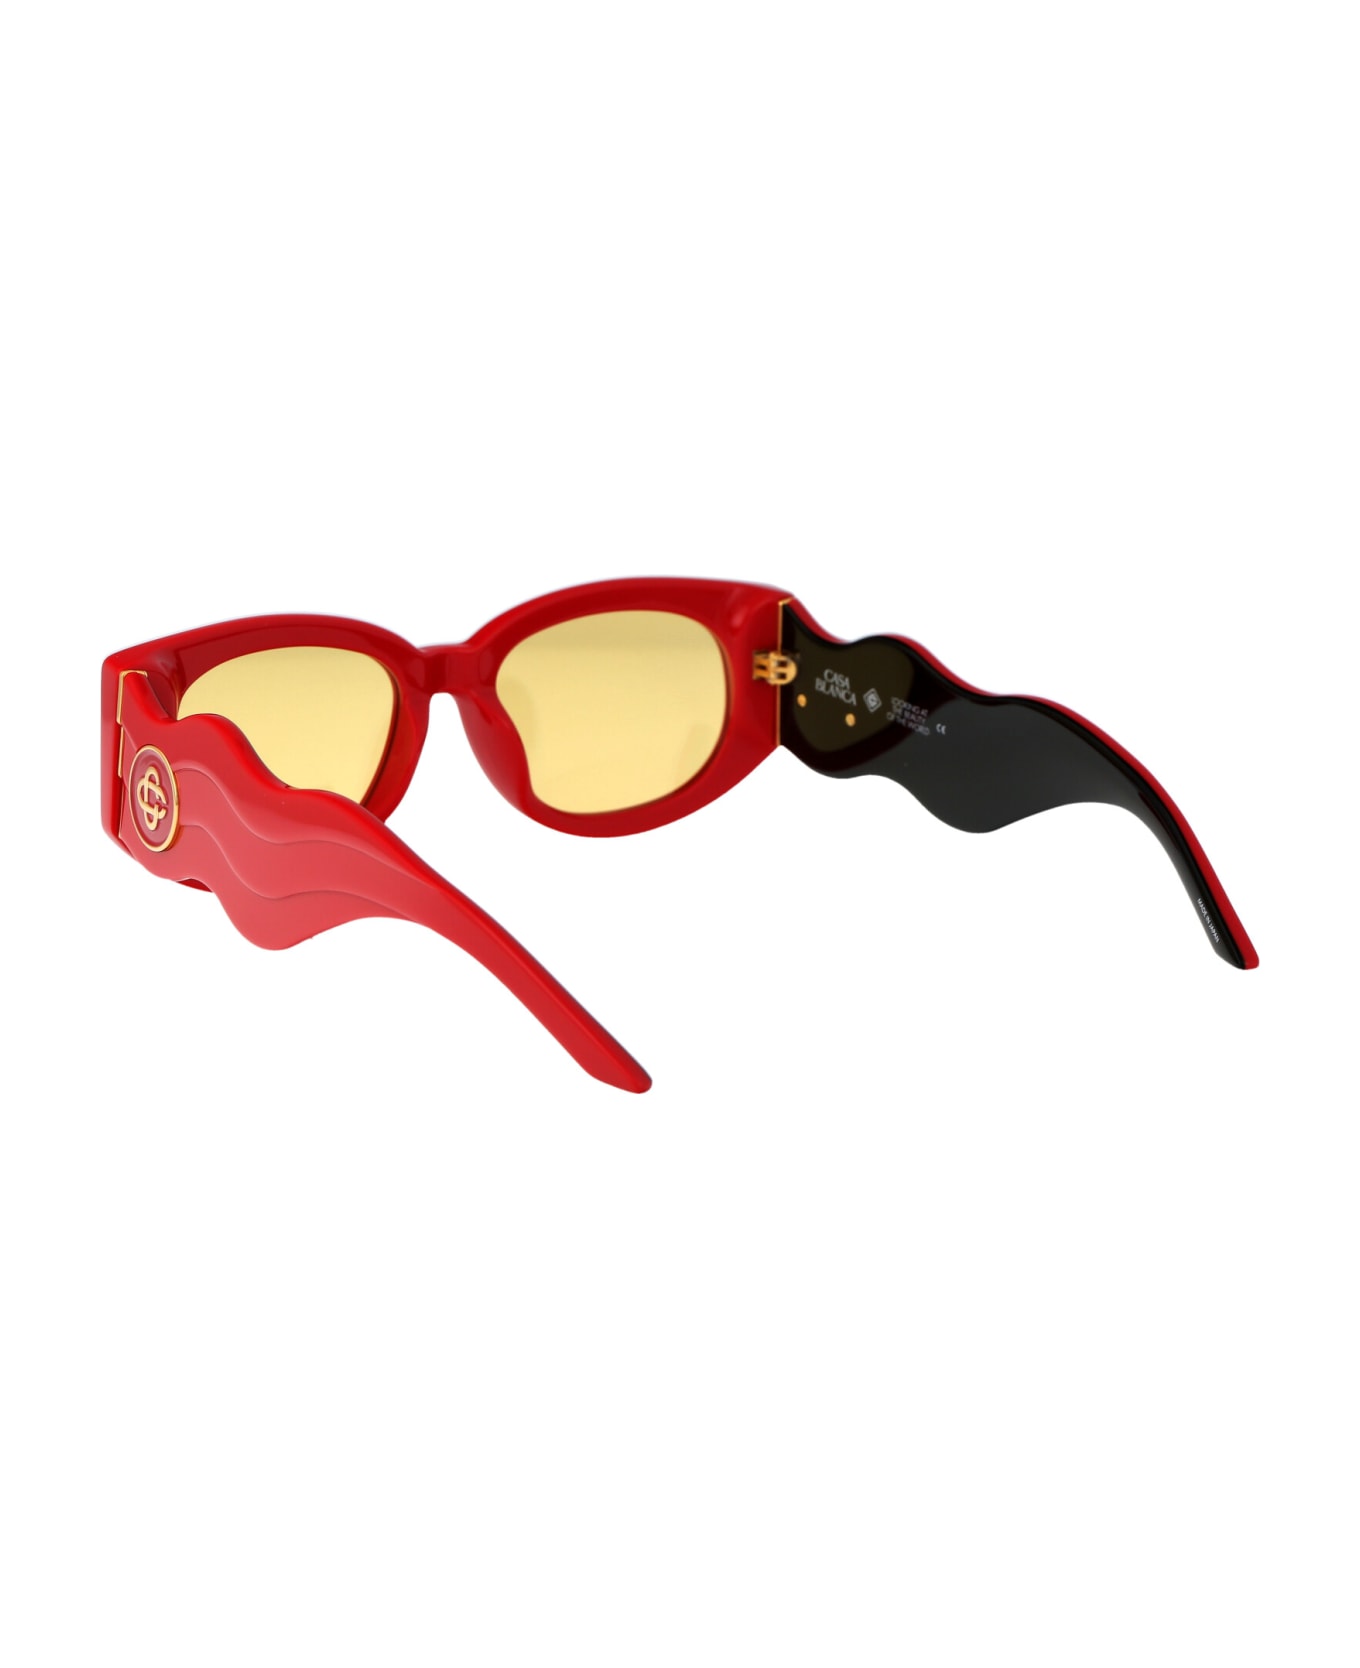 Casablanca As23-ew-020-04w Sunglasses - RED/YELLOW GOLD/CANARY